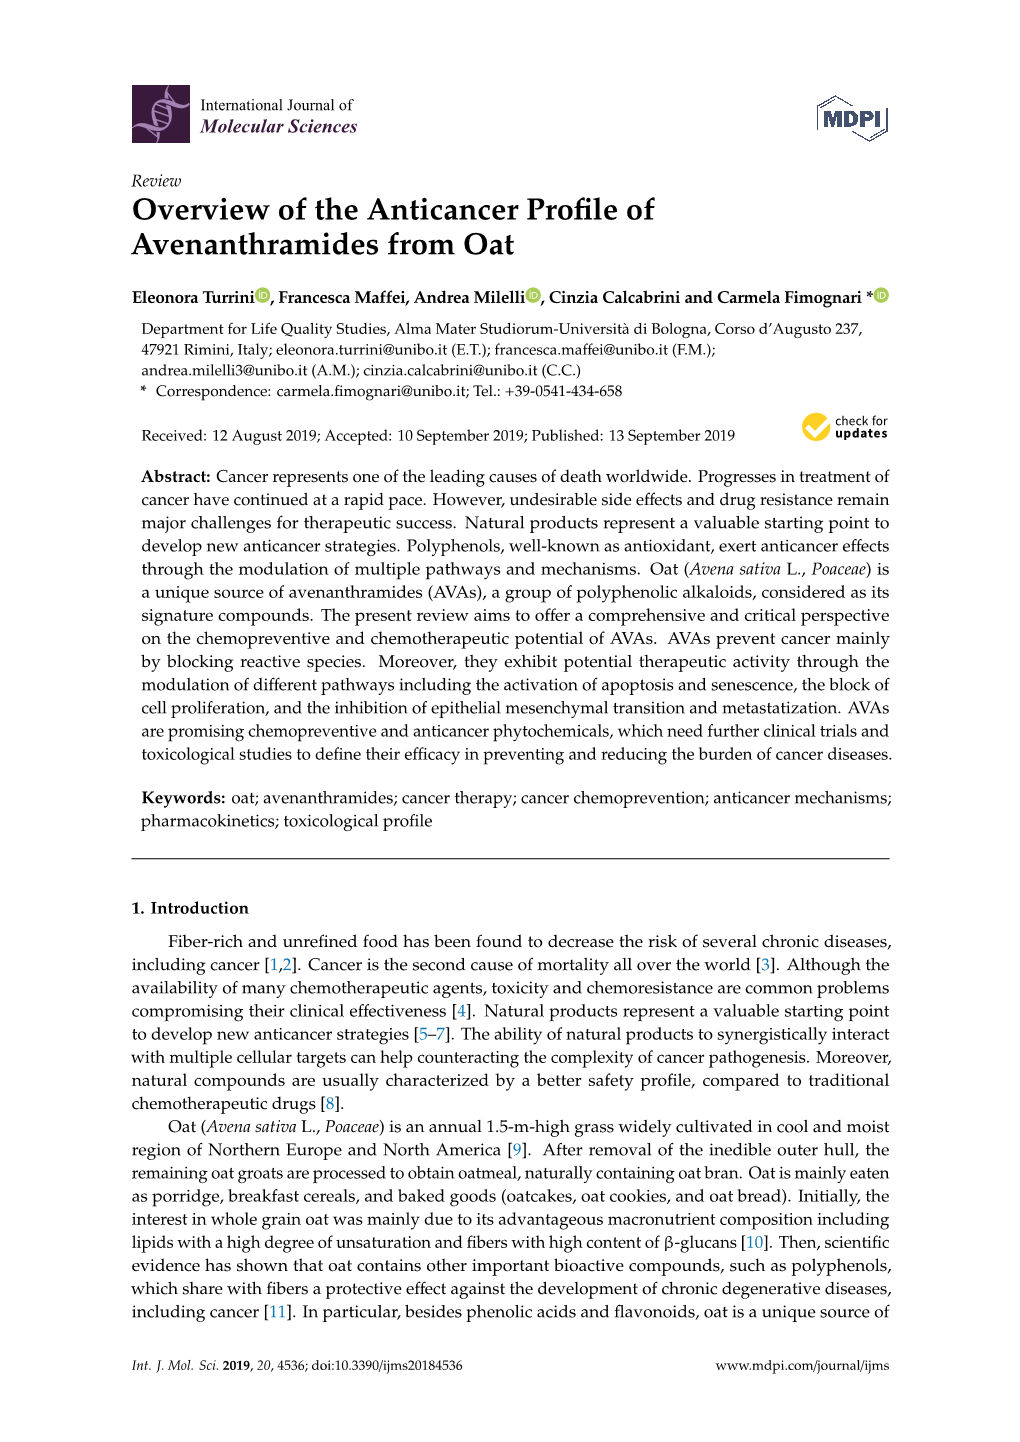 Overview of the Anticancer Profile of Avenanthramides From